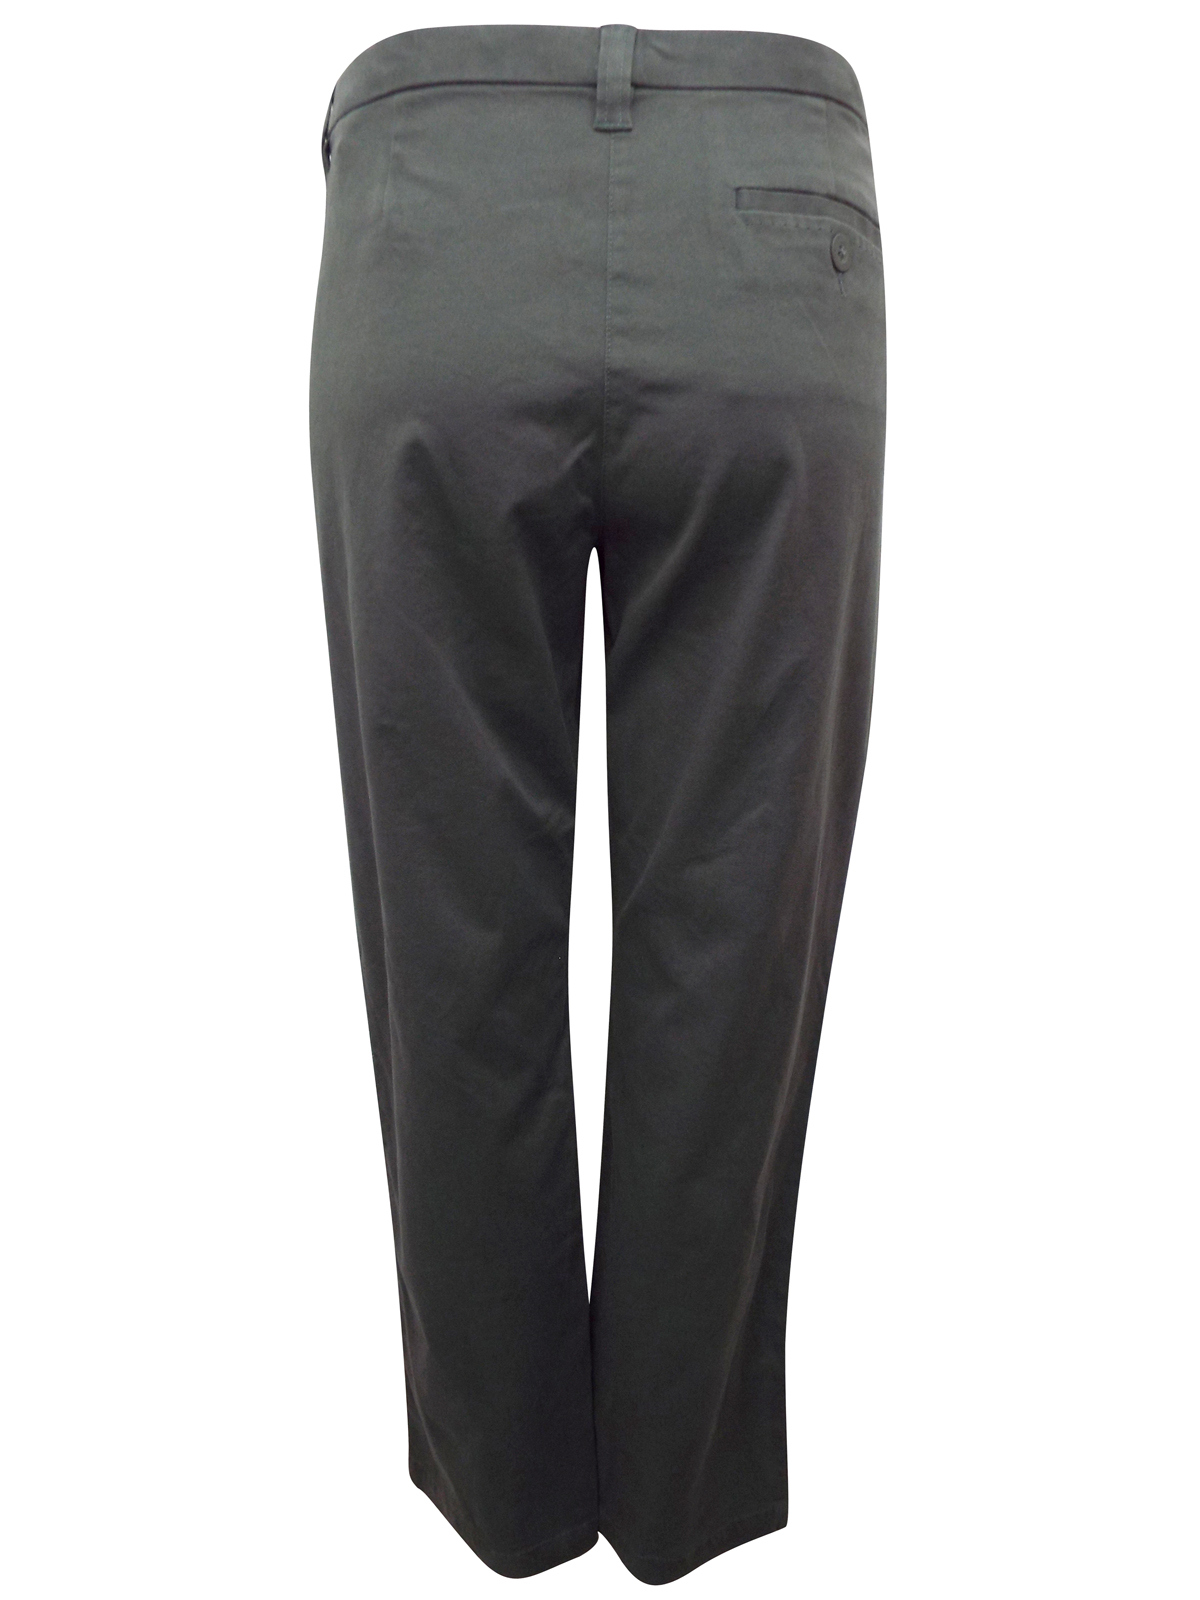 Marks and Spencer - - M&5 KHAKI Cotton Rich Straight Leg Trousers ...